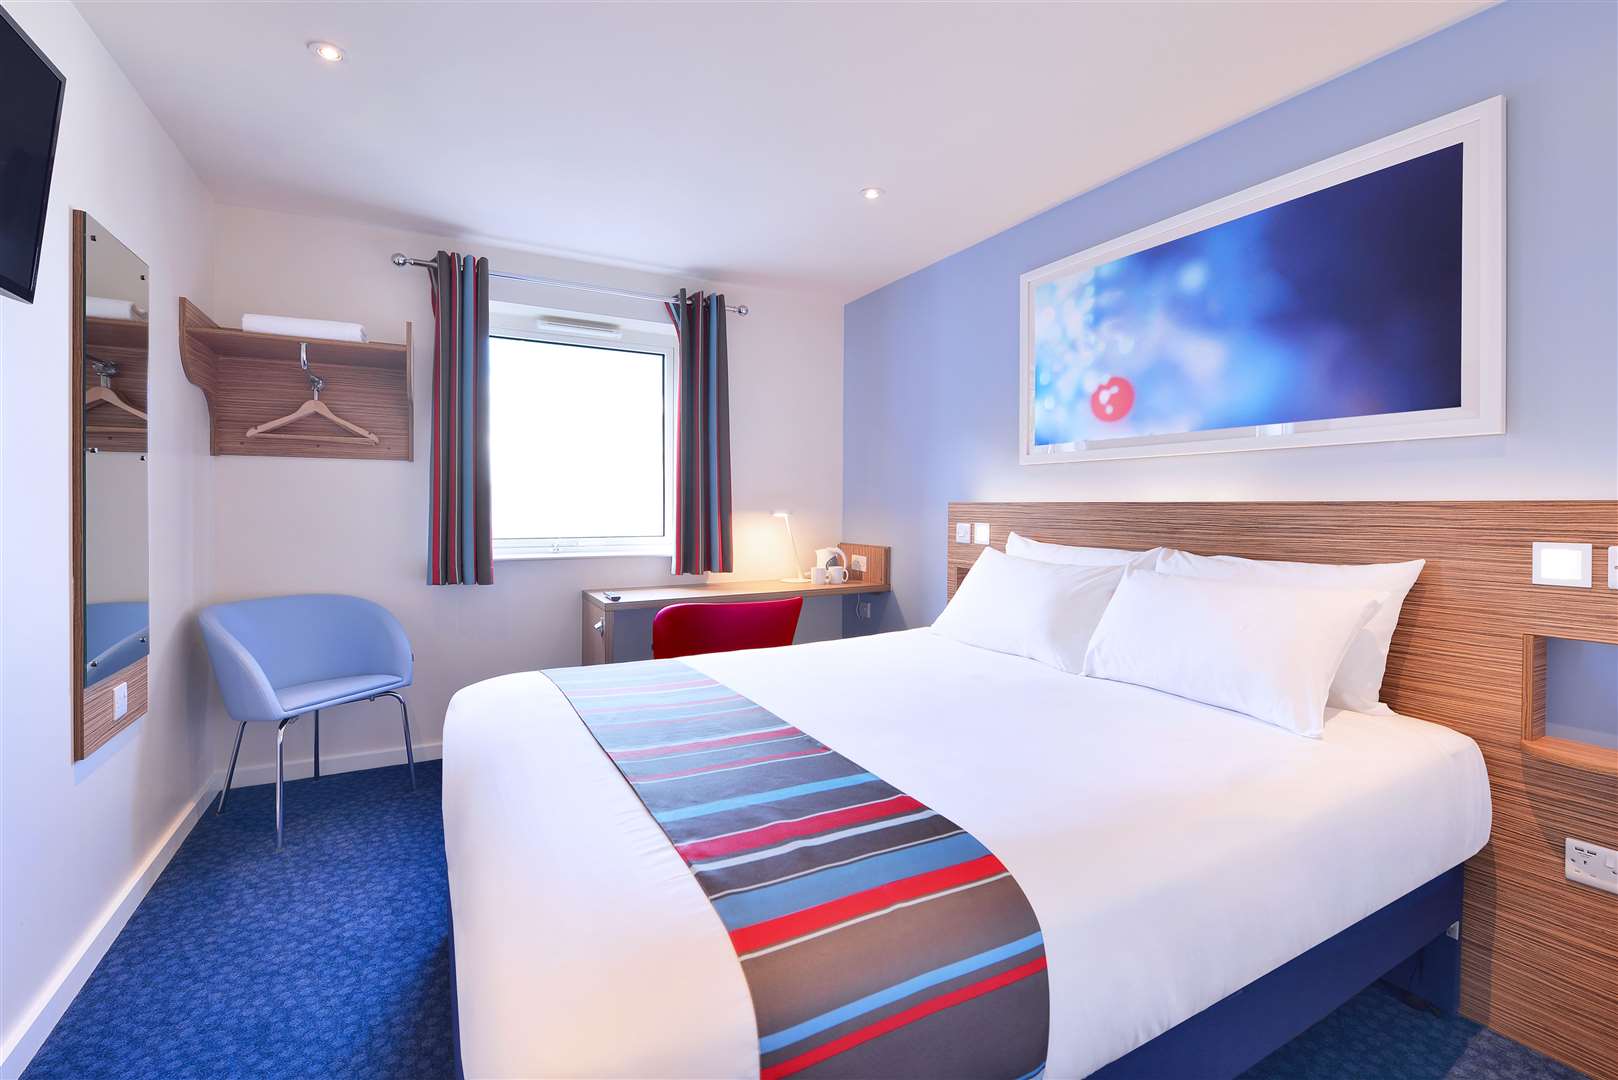 Students will work and study on the Travelodge programme